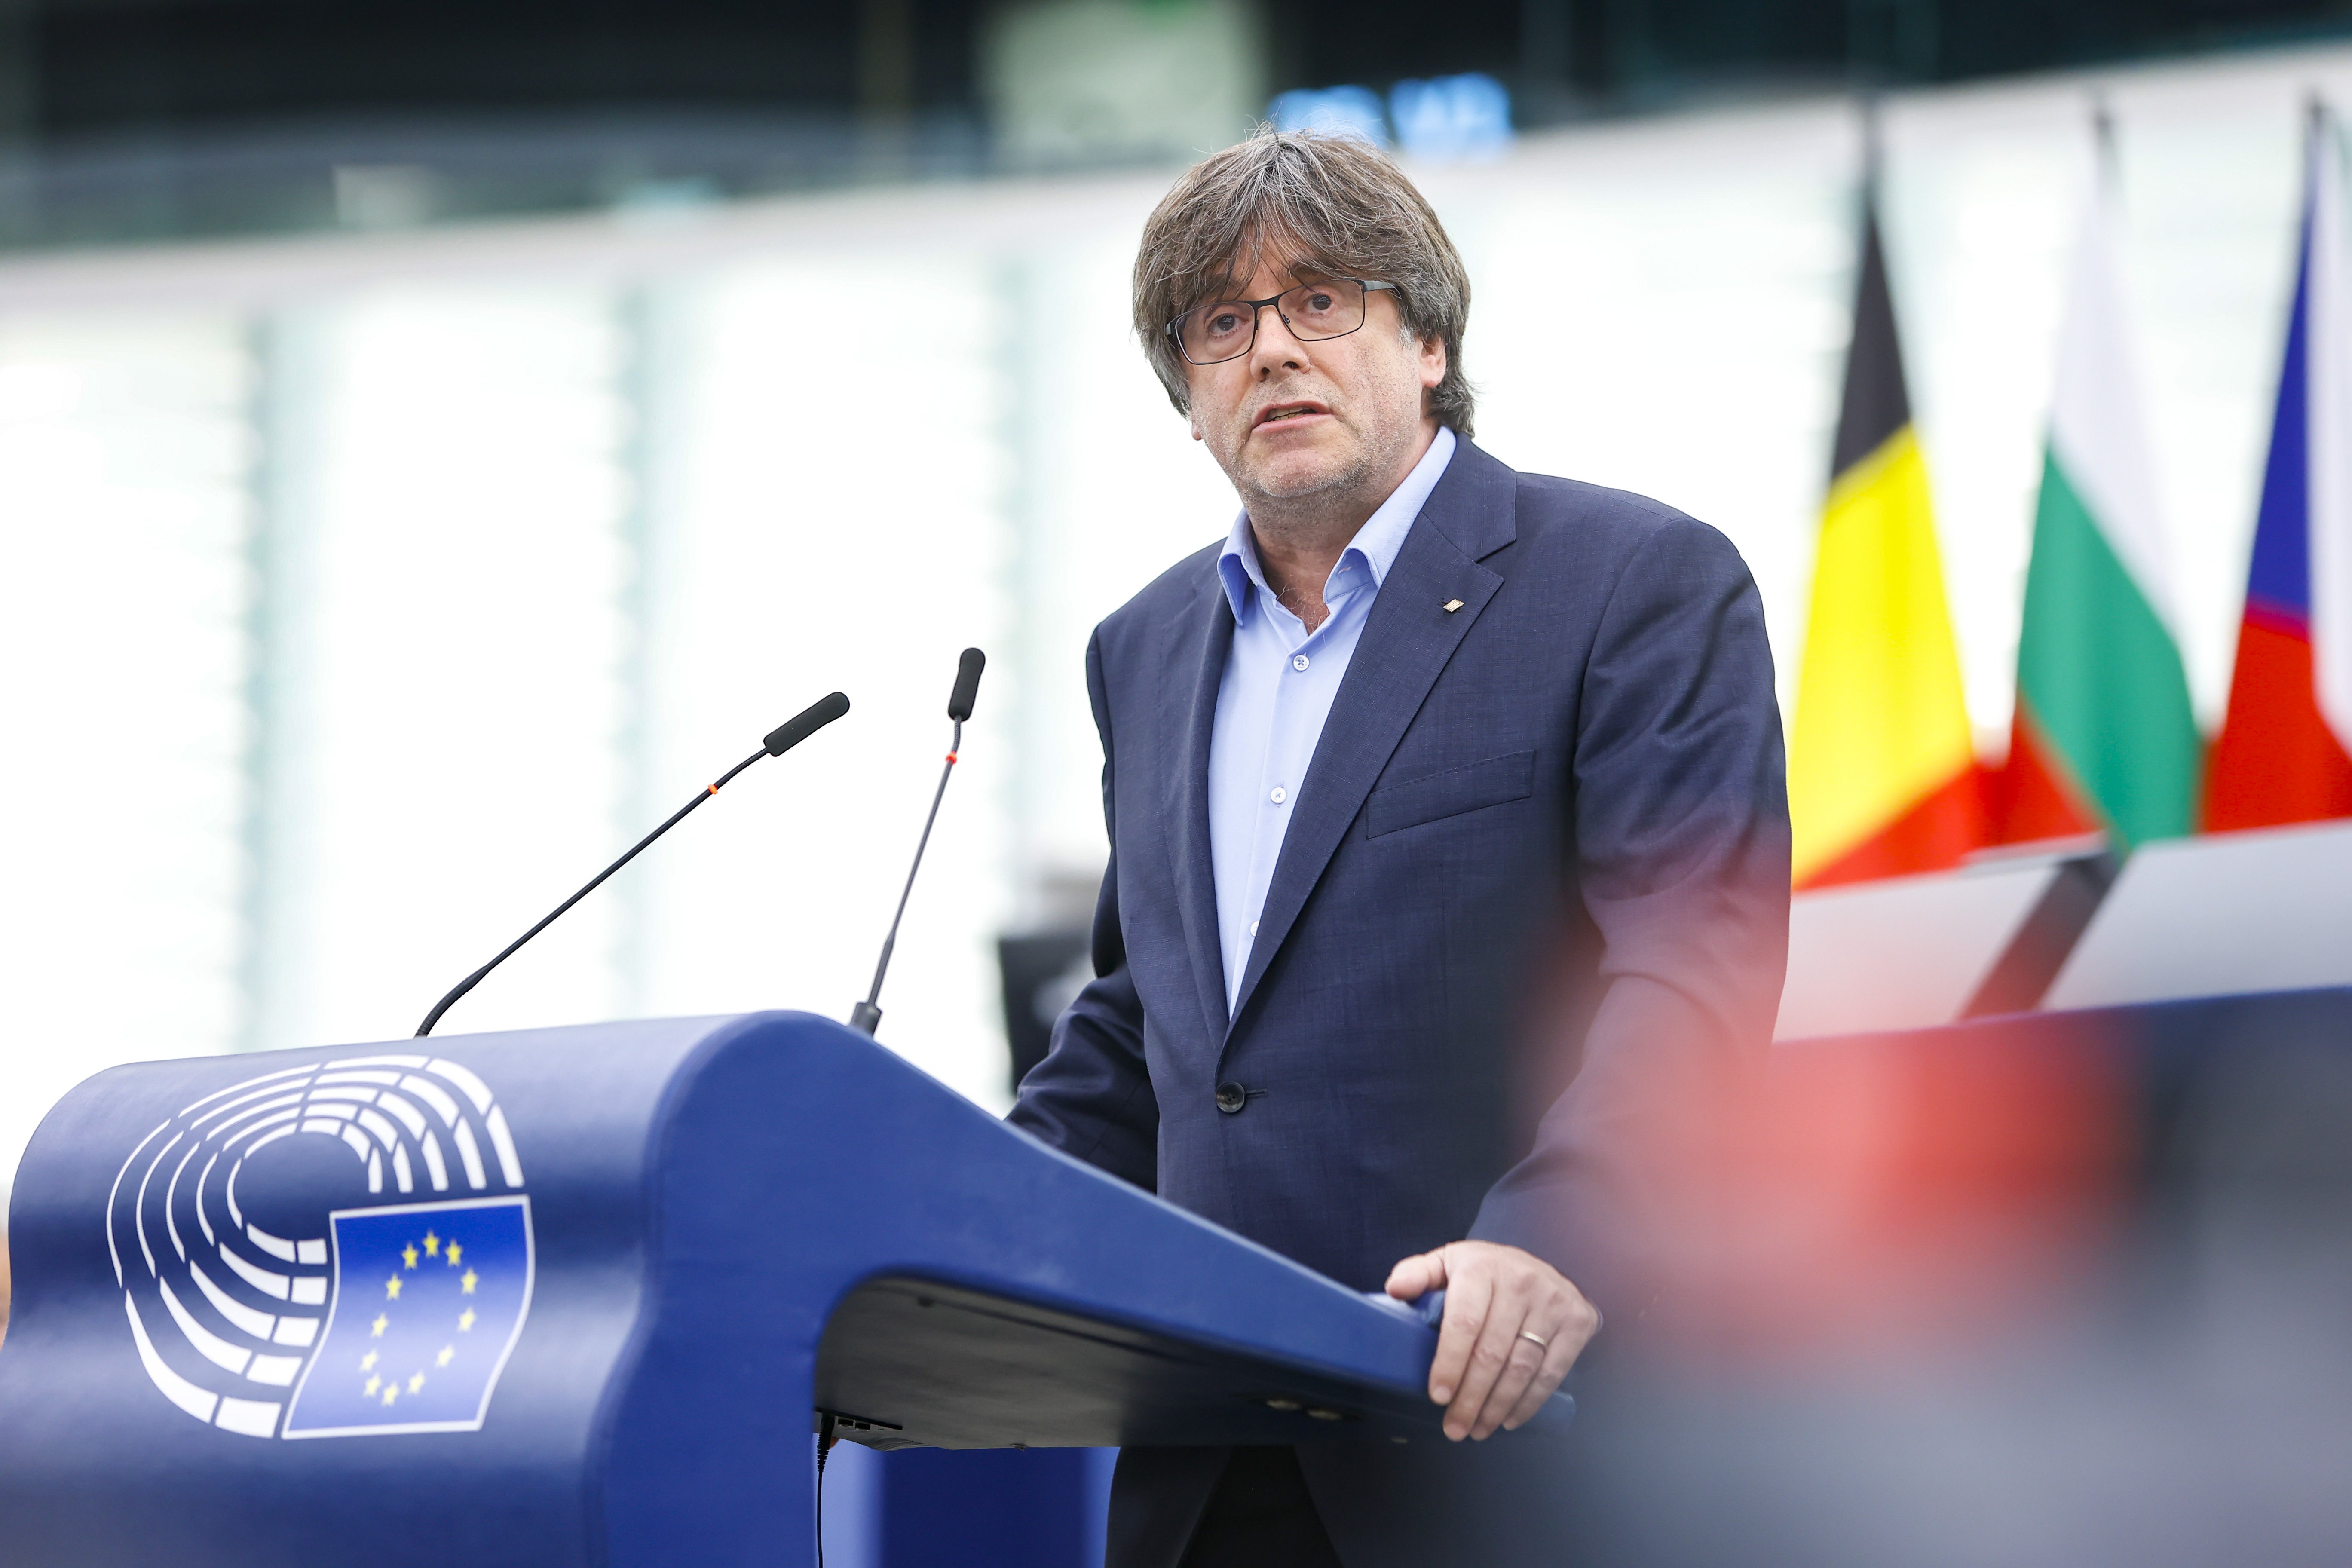 Puigdemont calls the public "to show what we are ready to do" on October 1st